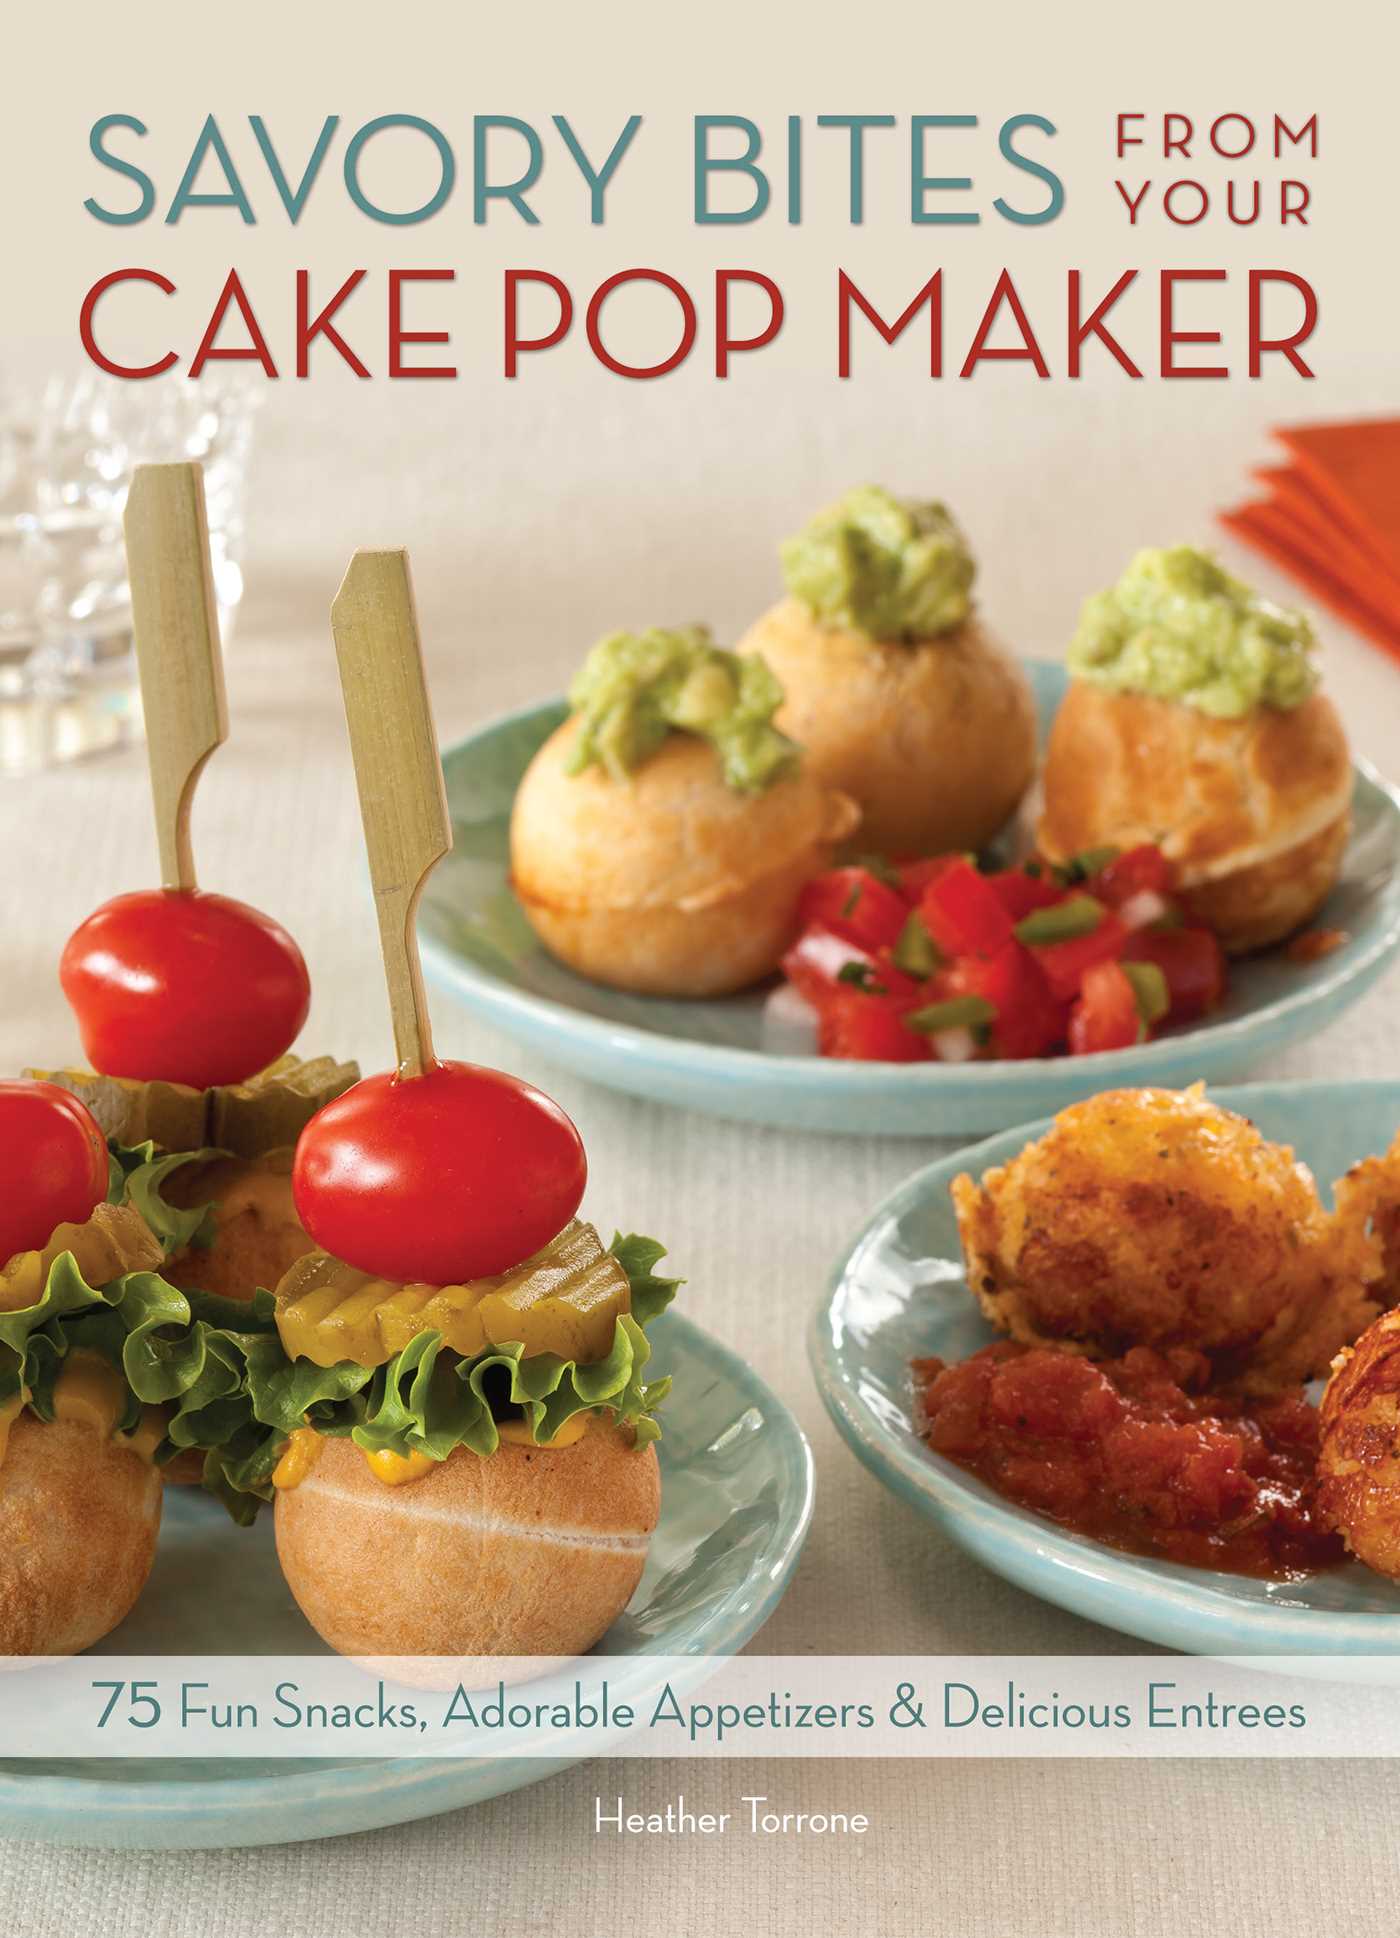 Savory Bites From Your Cake Pop Maker - 10-14.99